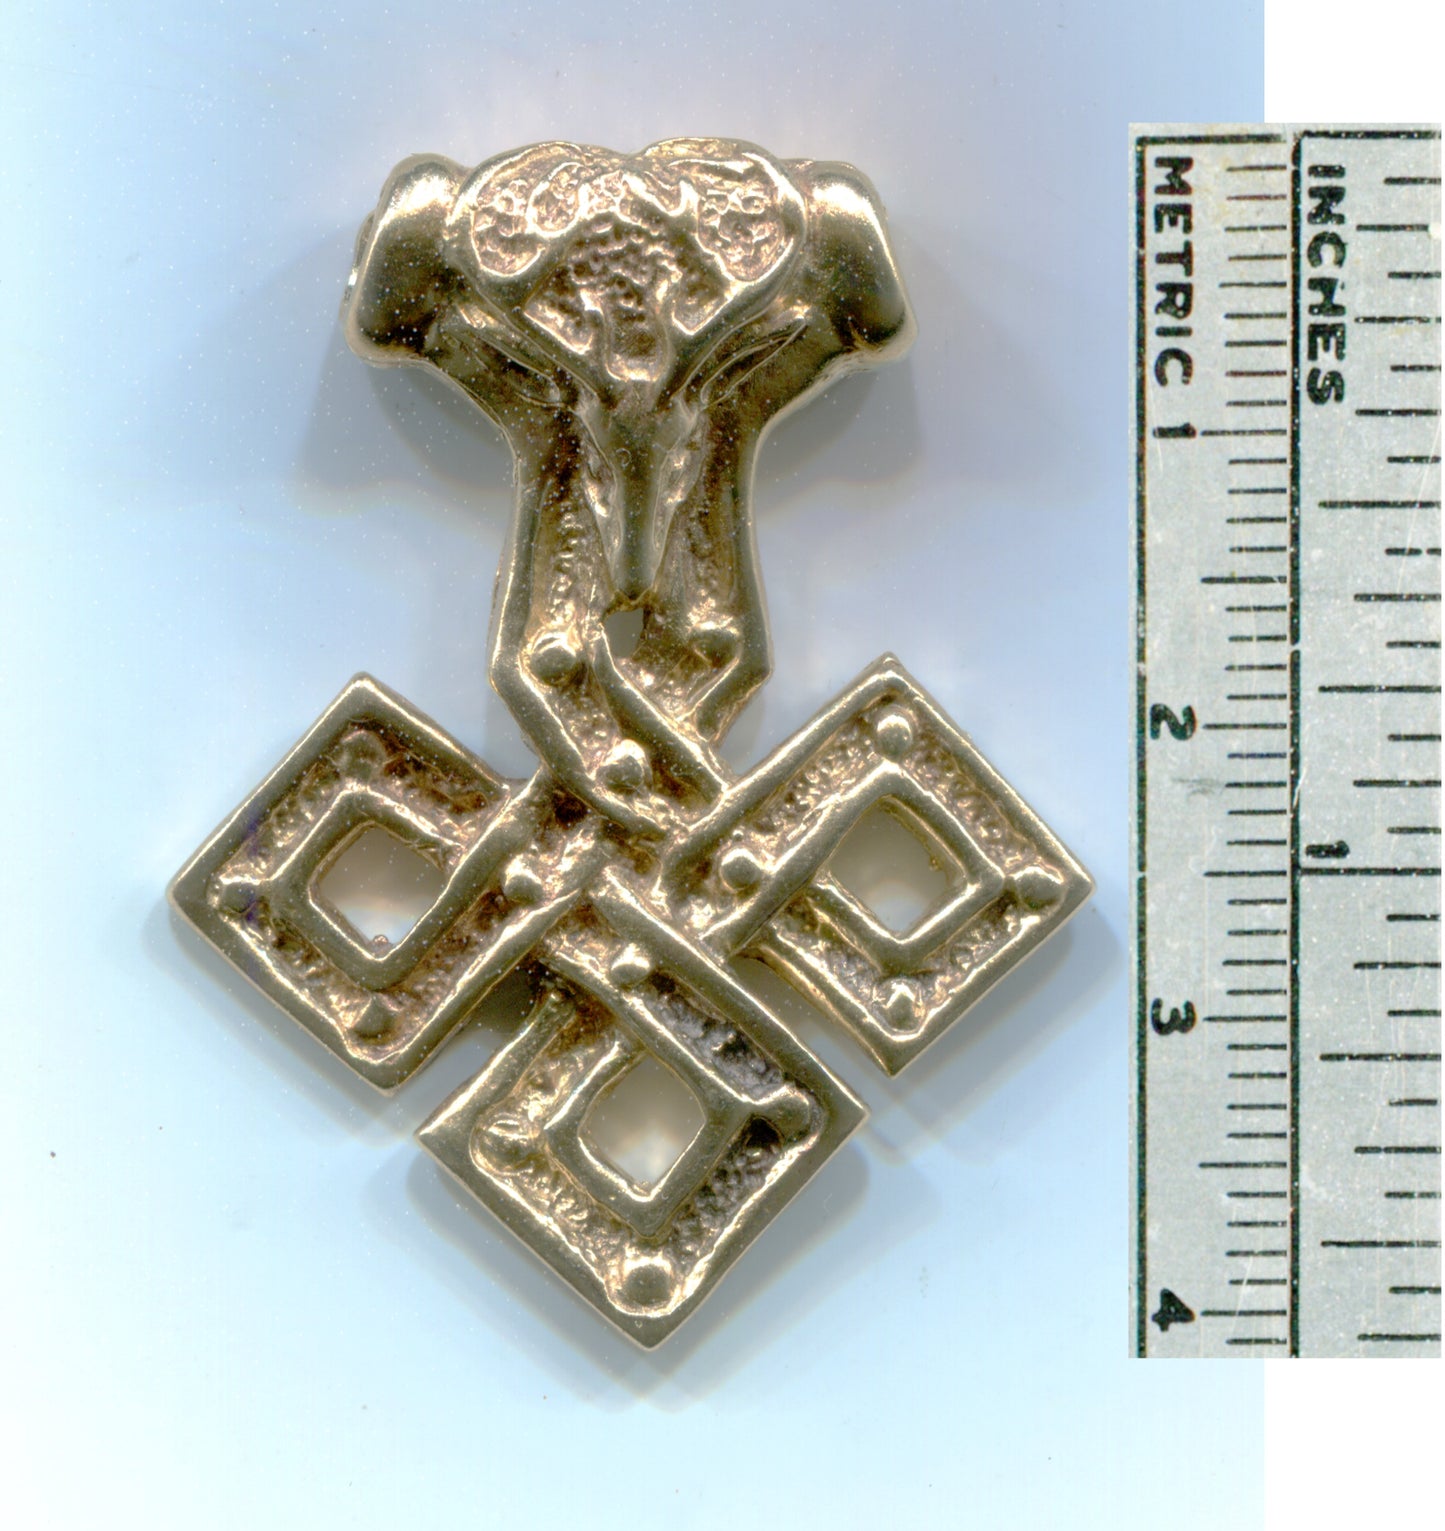 Stag Knot Thor's Hammer - 5208B